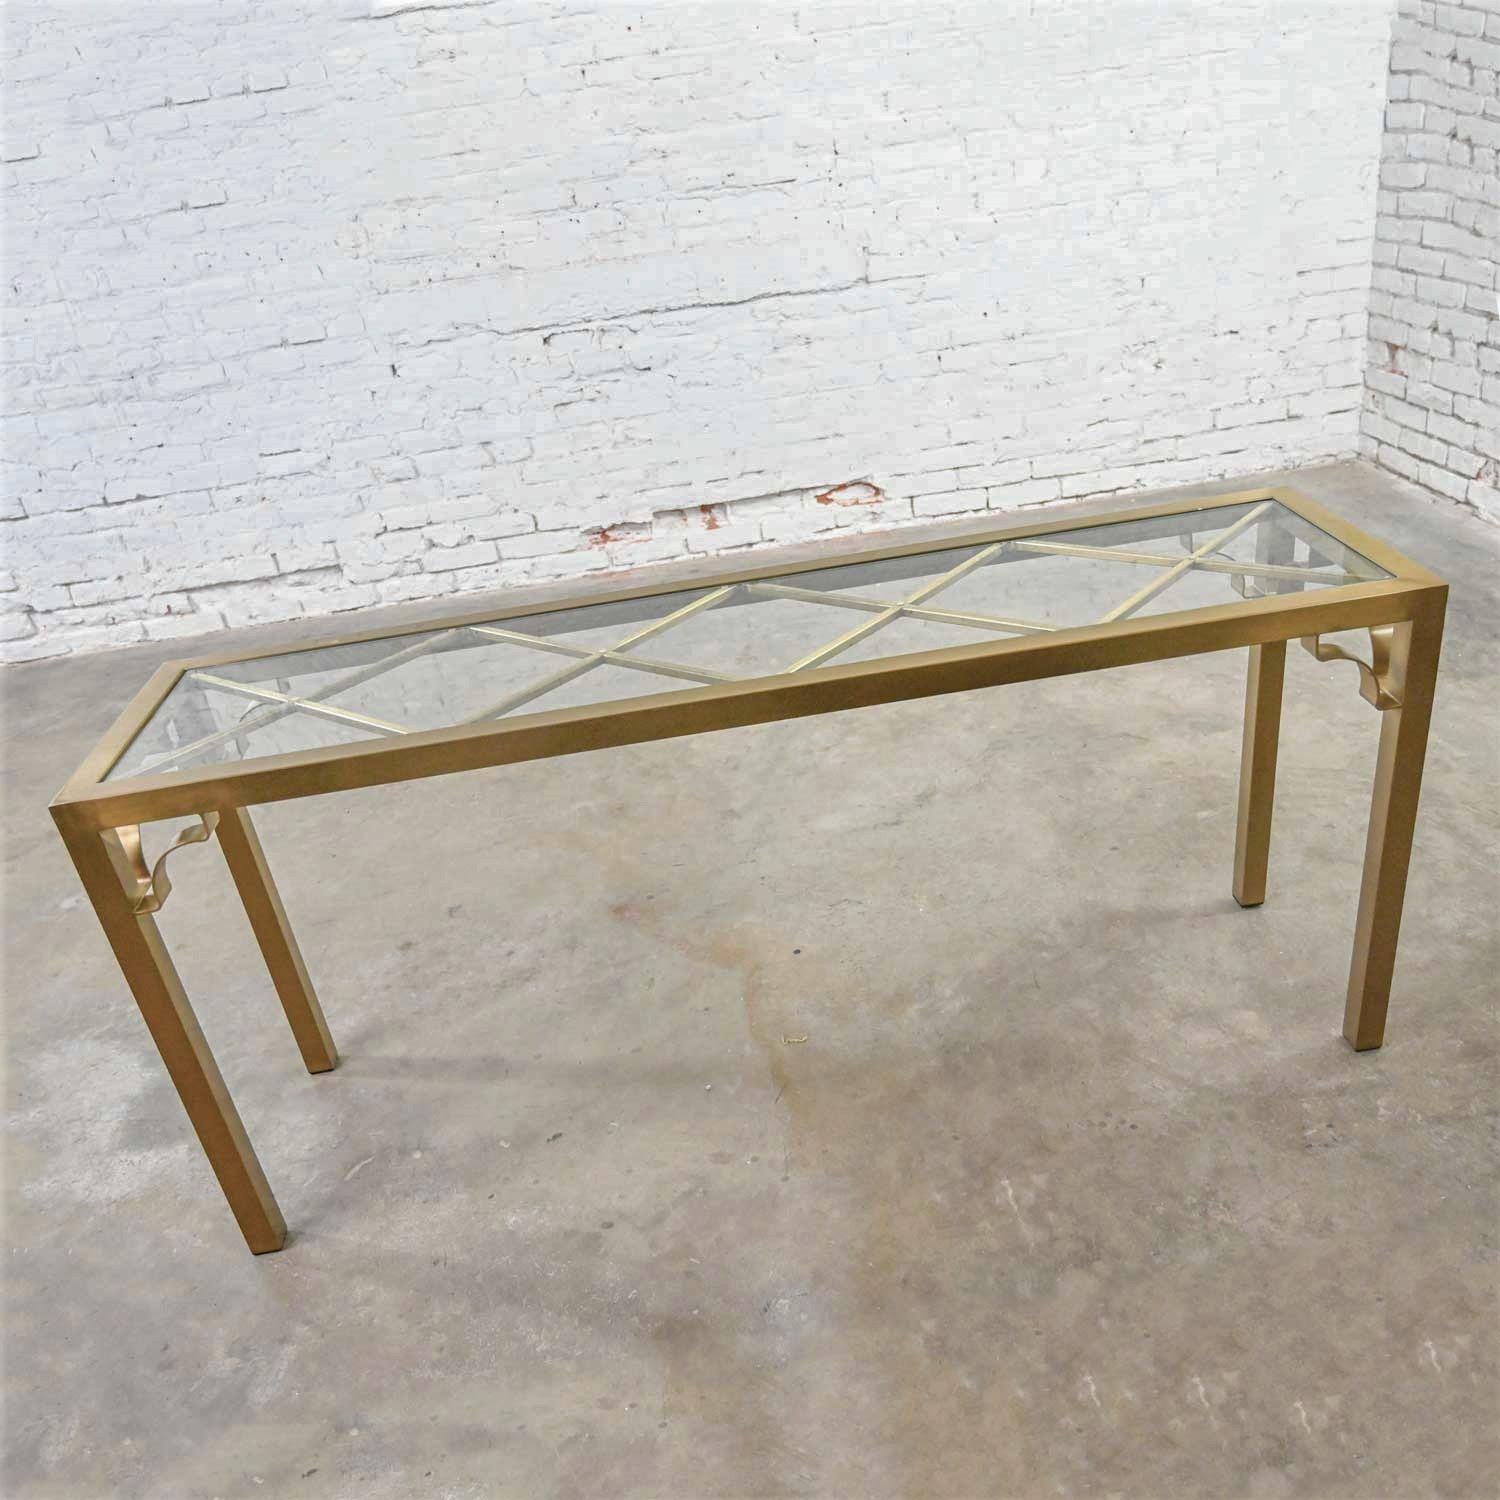 Fabulous Modern or Hollywood Regency brushed brass plated Parsons’s style rectangle console table with an X design bracing for its glass insert top. Beautiful condition, keeping in mind that this is vintage and not new so will have signs of use and